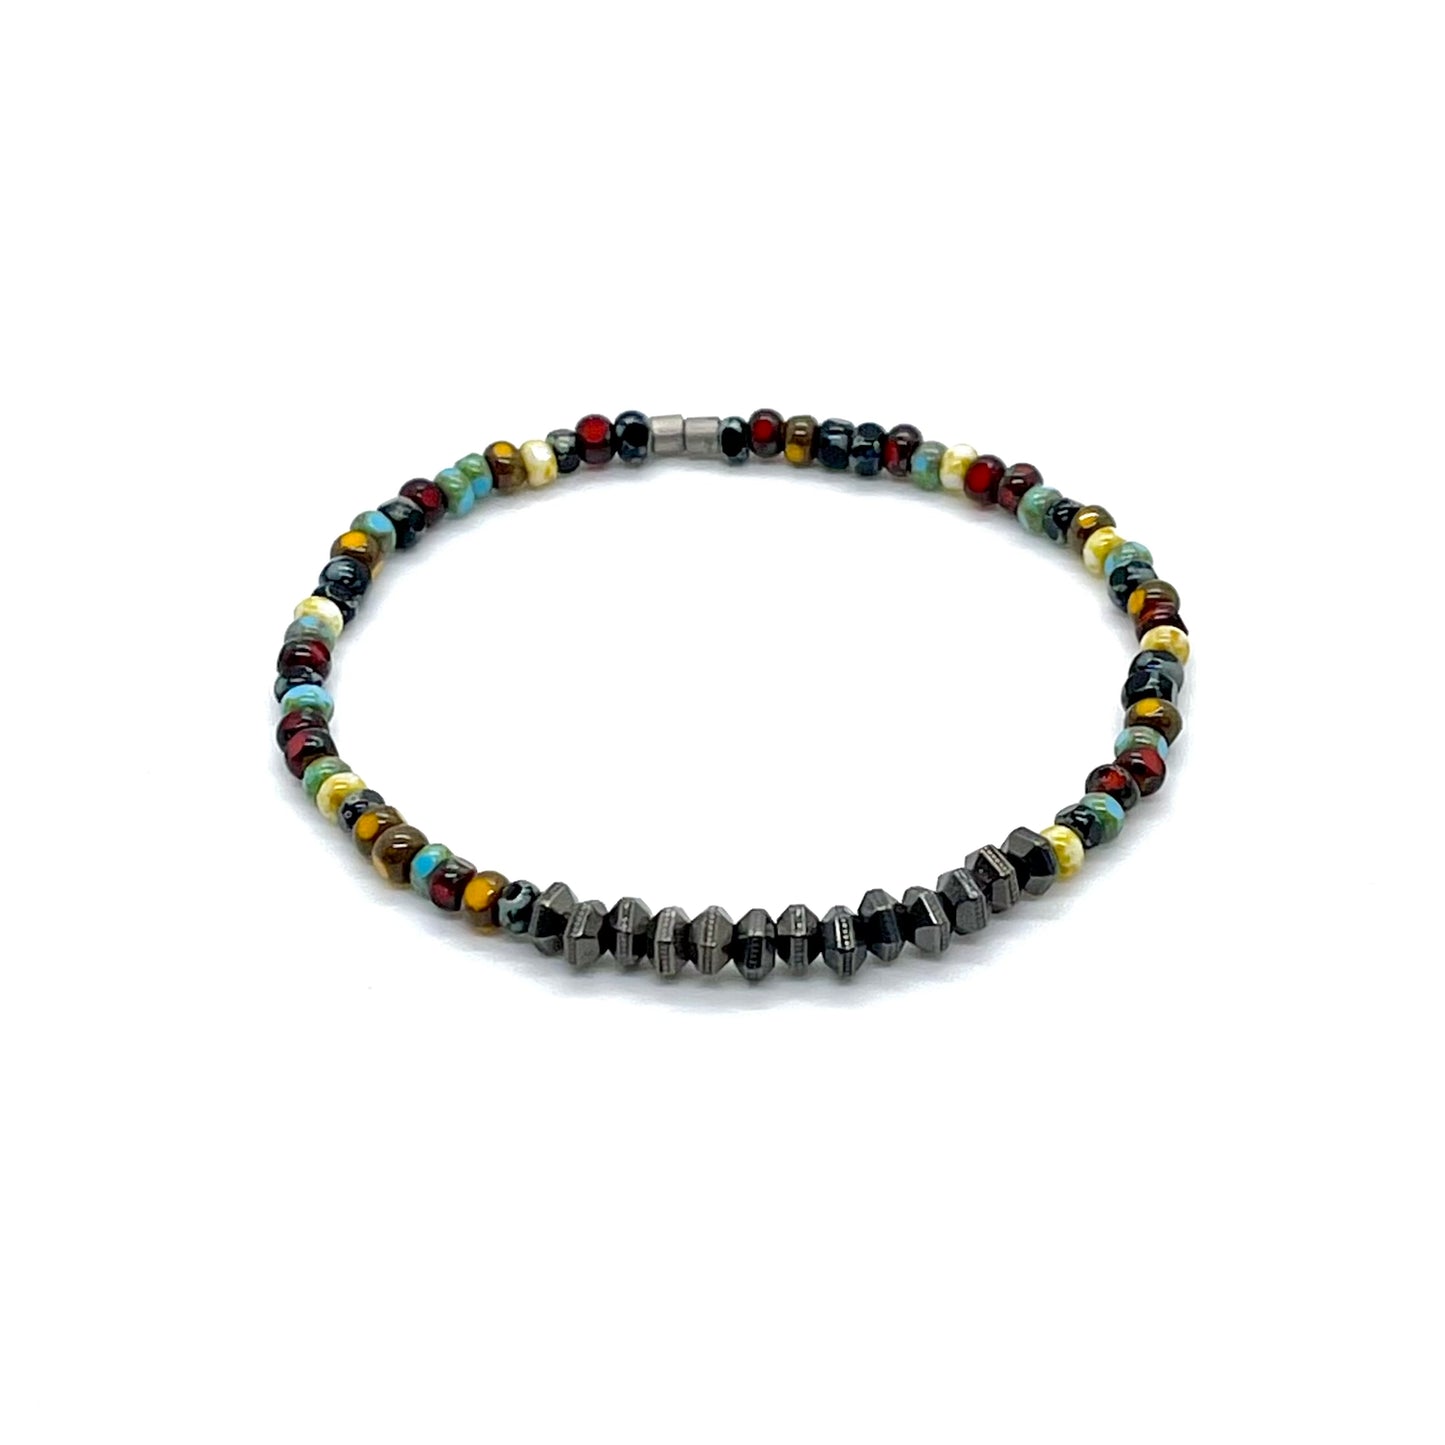 Multicolor bead bracelet for men with black-plated pewter hexigon disks on elastic stretch cord.